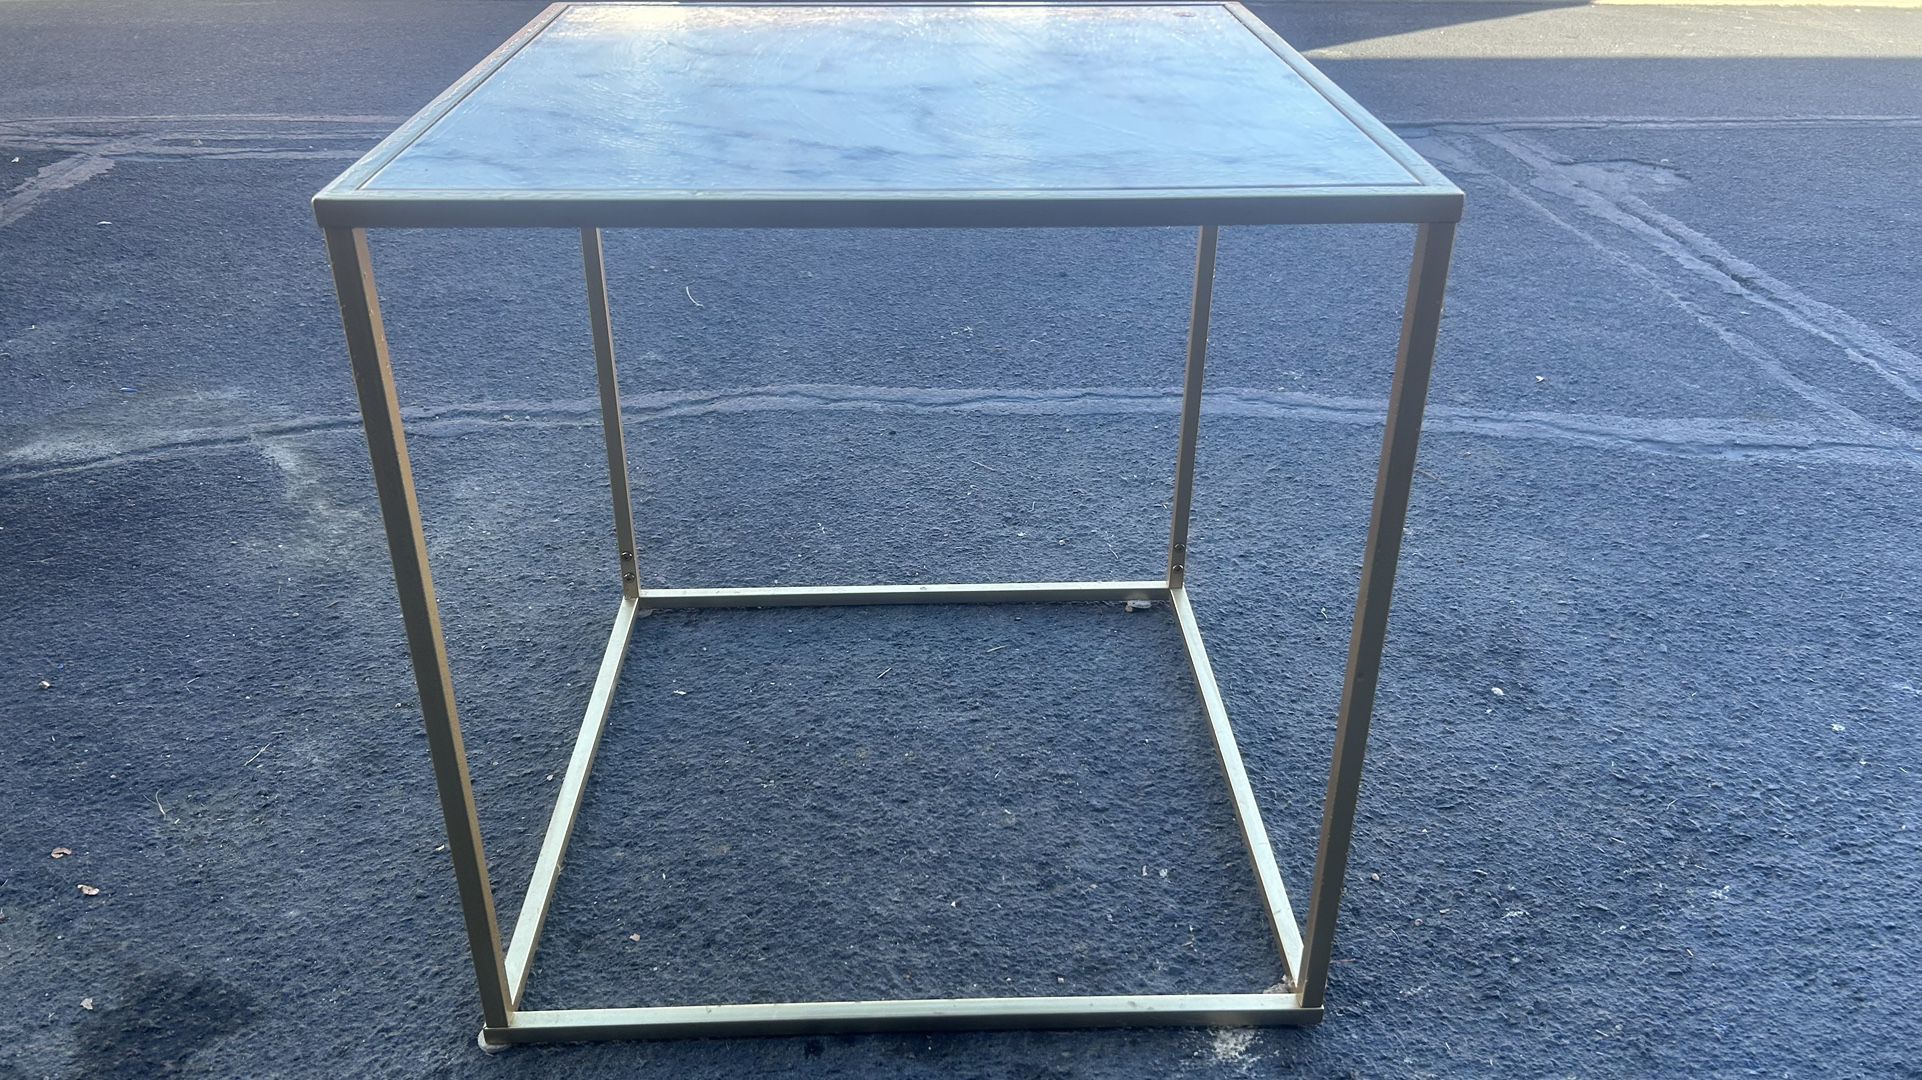 Transitional style end&side table Brushed Gold base and White Marble top,24” square and height(Pick up location:Denver 80229)